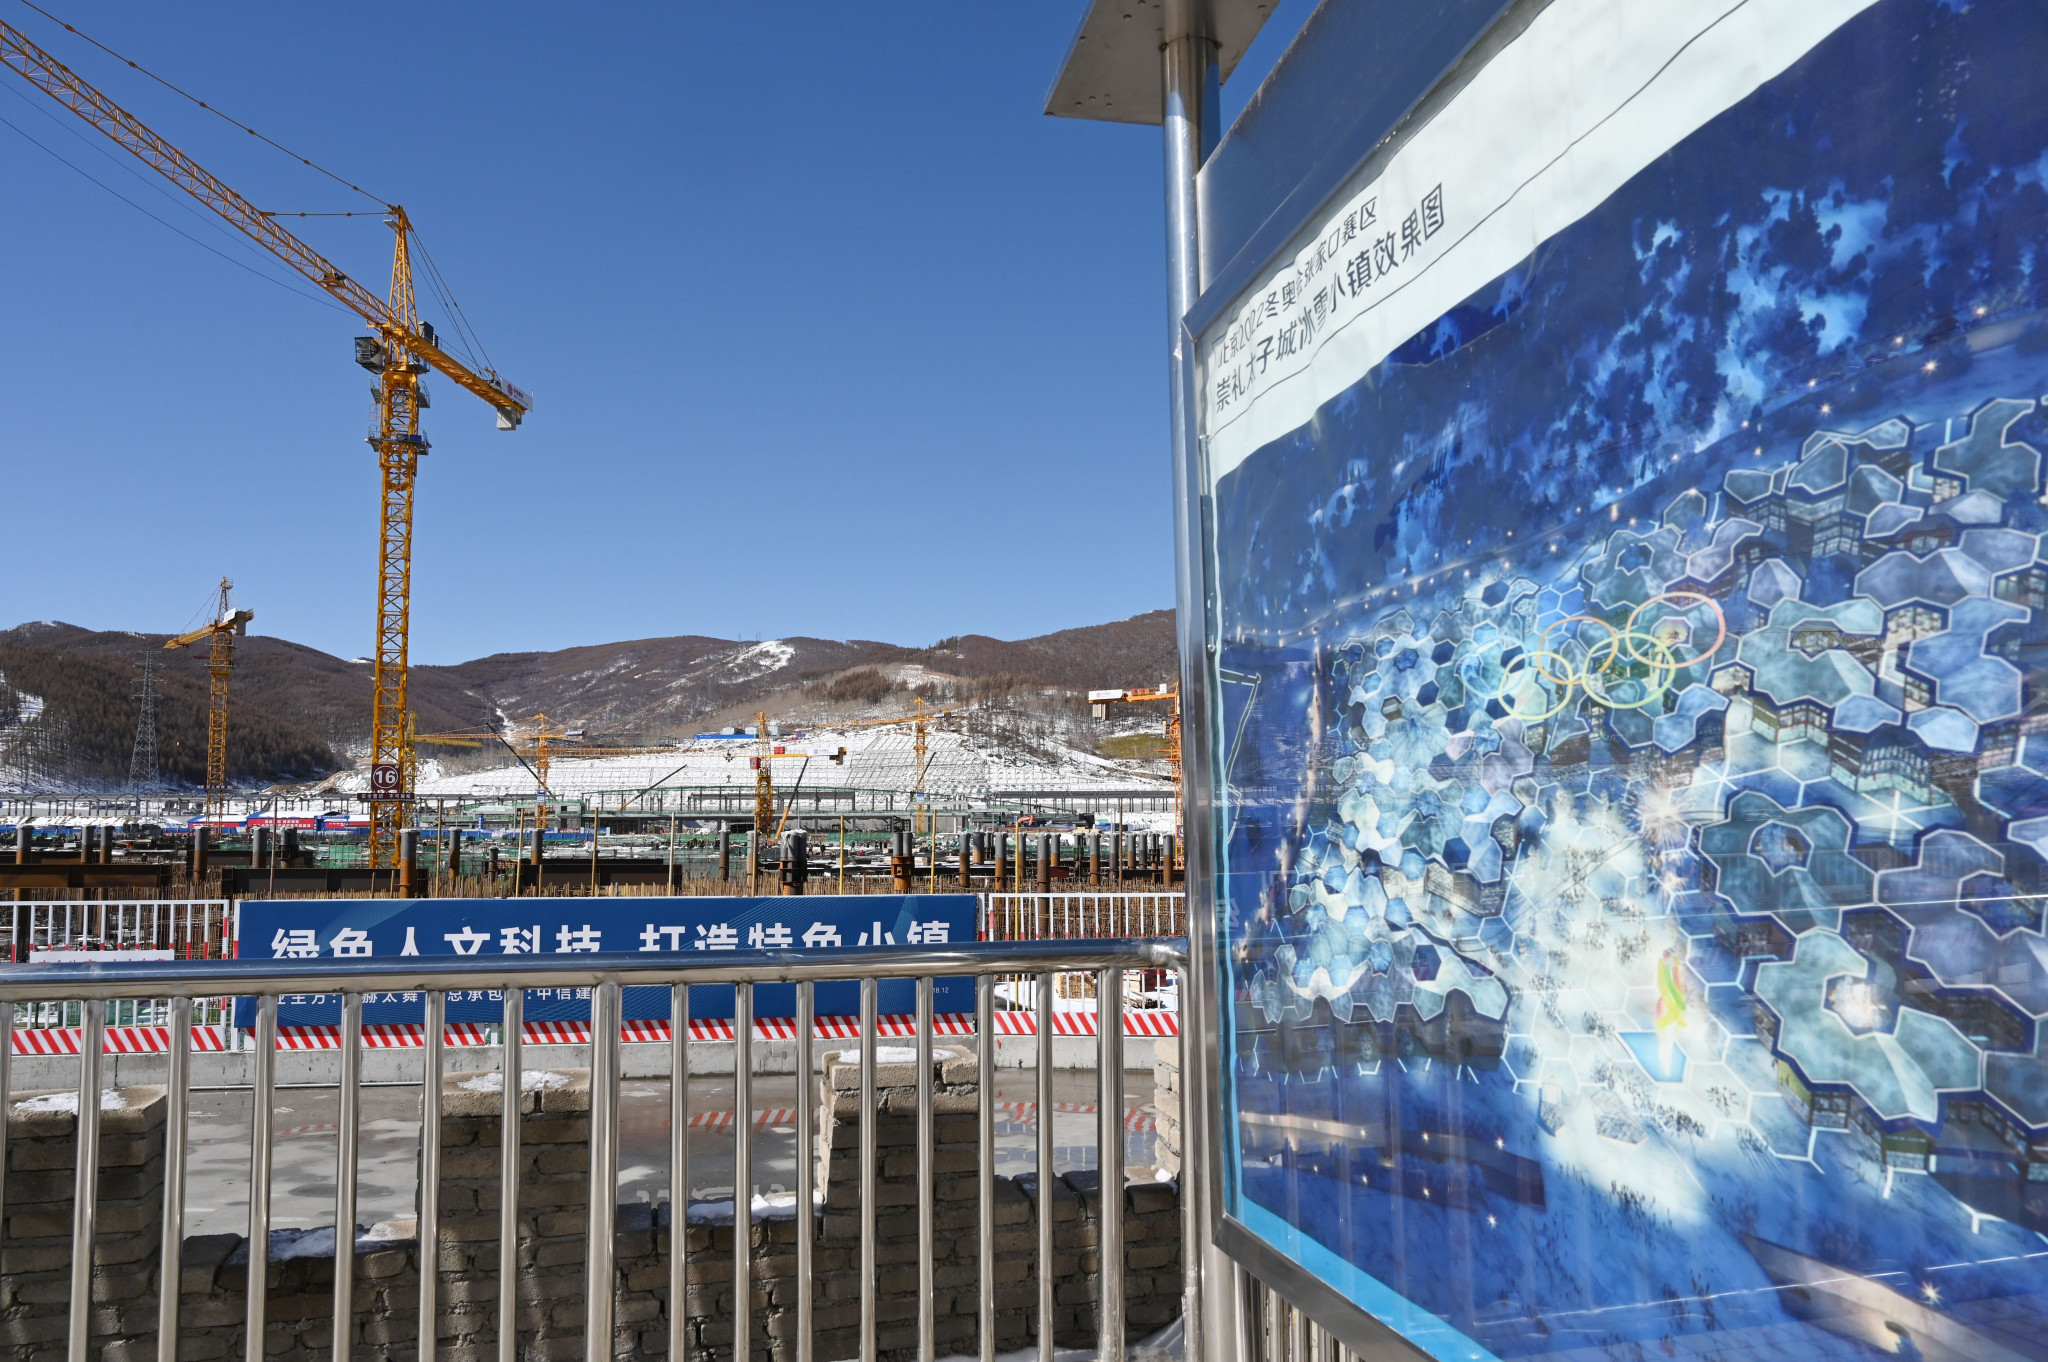 Organisers are hoping to use the event as a testing ground for the 2022 Winter Olympics in Beijing ©Getty Images